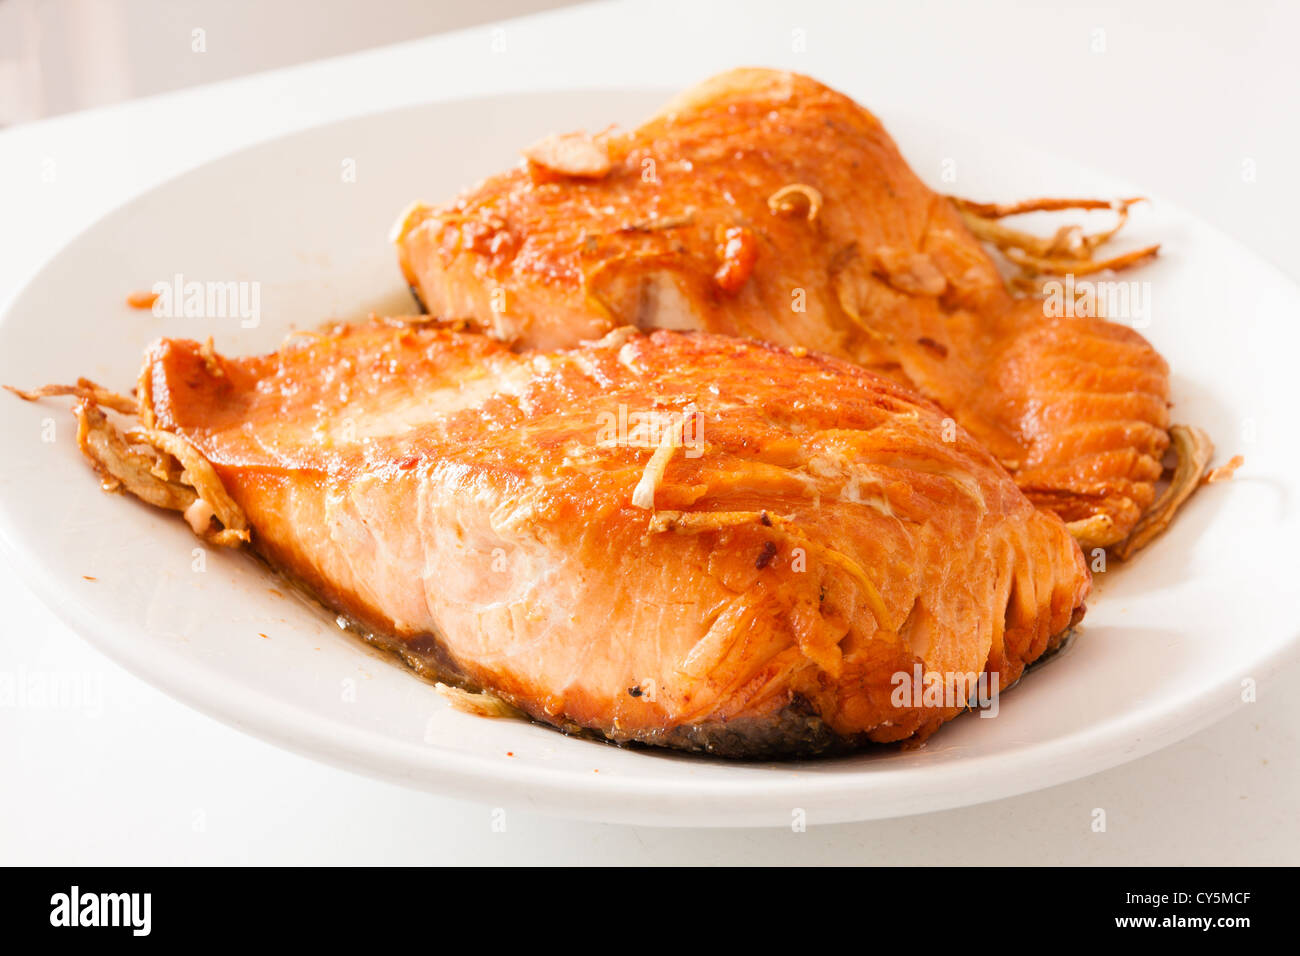 Pan-seared, sauteed Chilean salmon fillet with ginger on white plate background Stock Photo